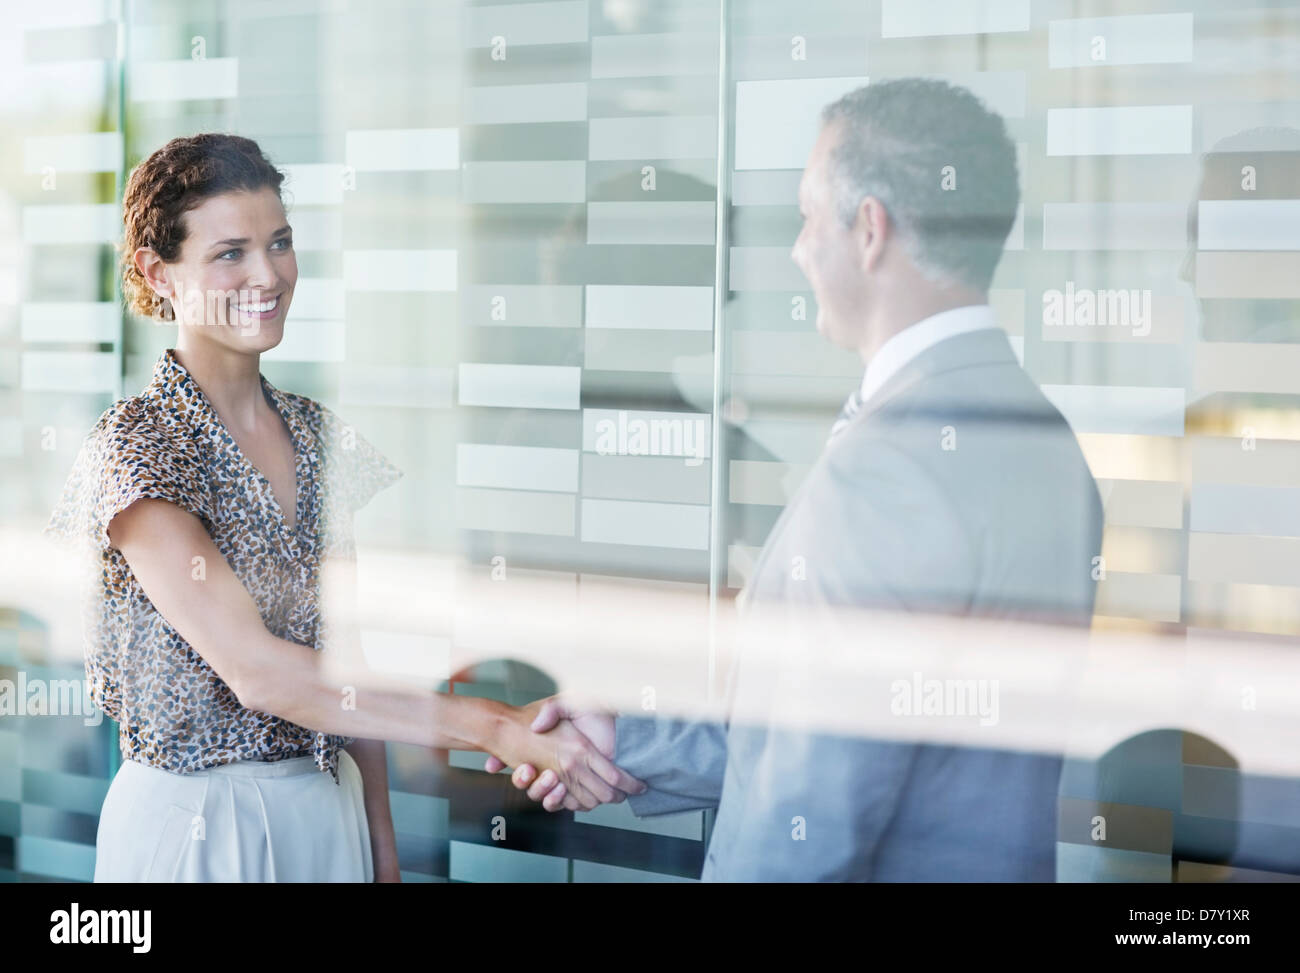 Business people shaking hands in office Banque D'Images